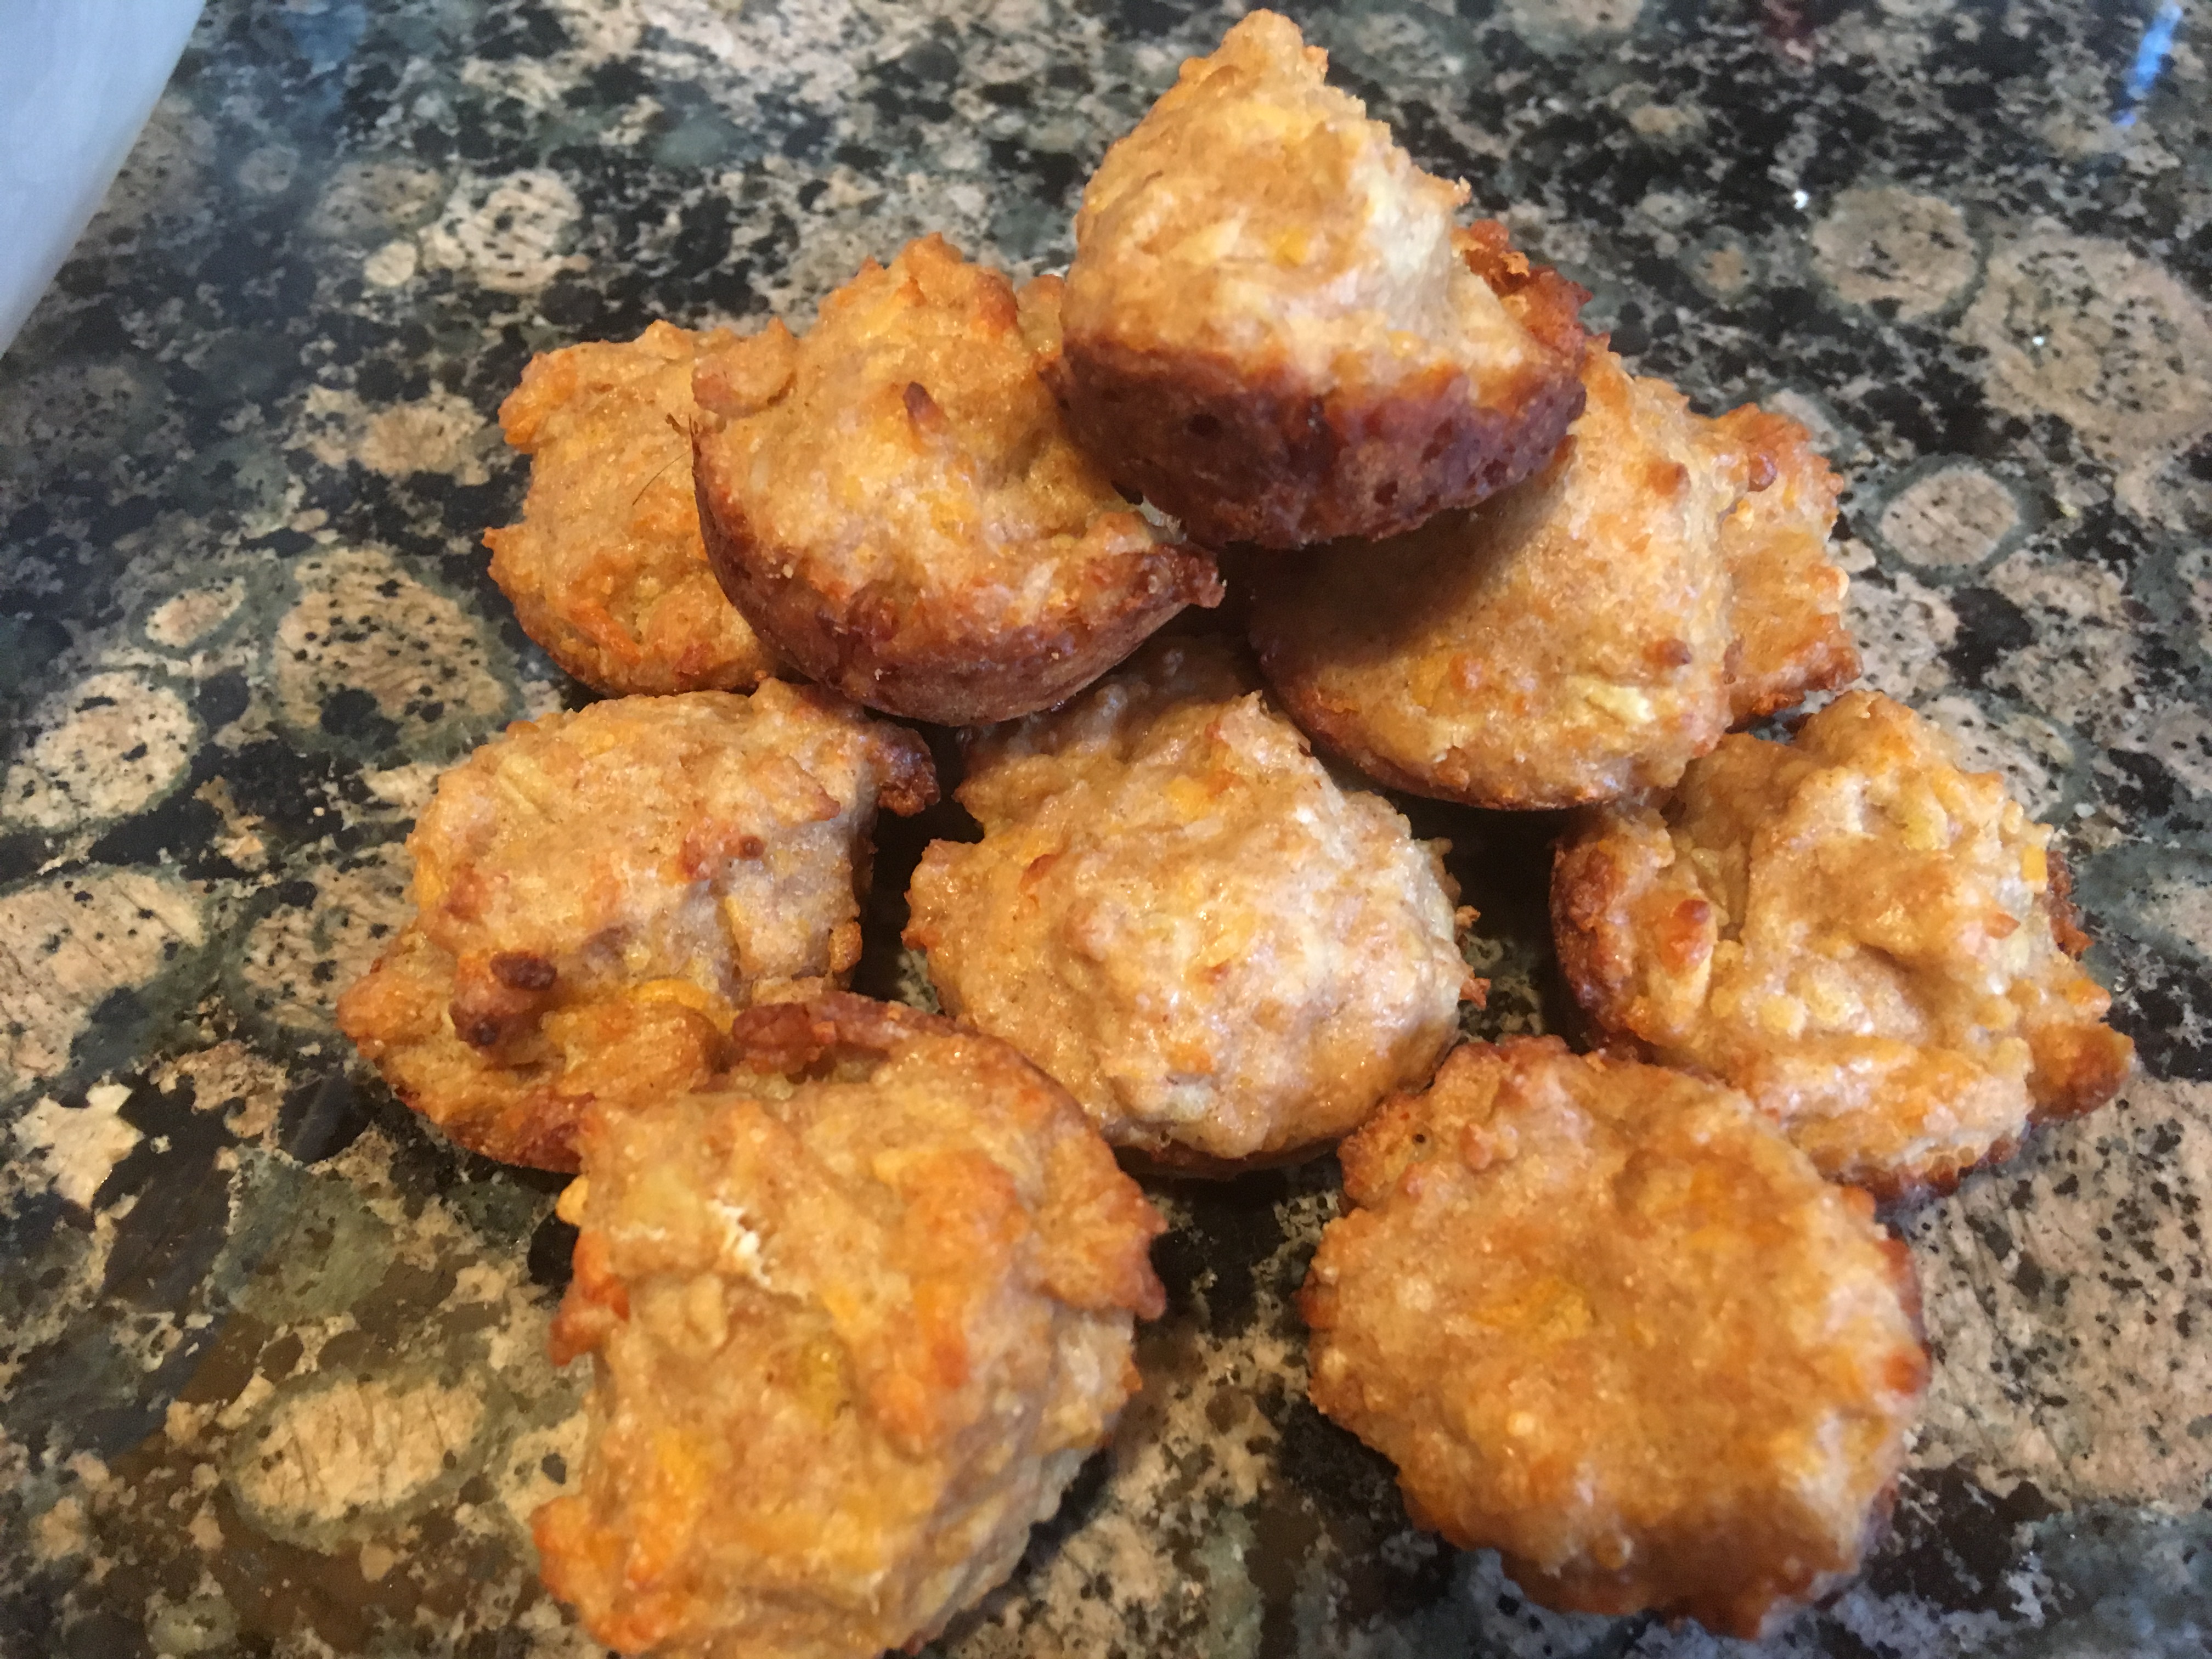 Apple and Cheddar Puppy Cakes